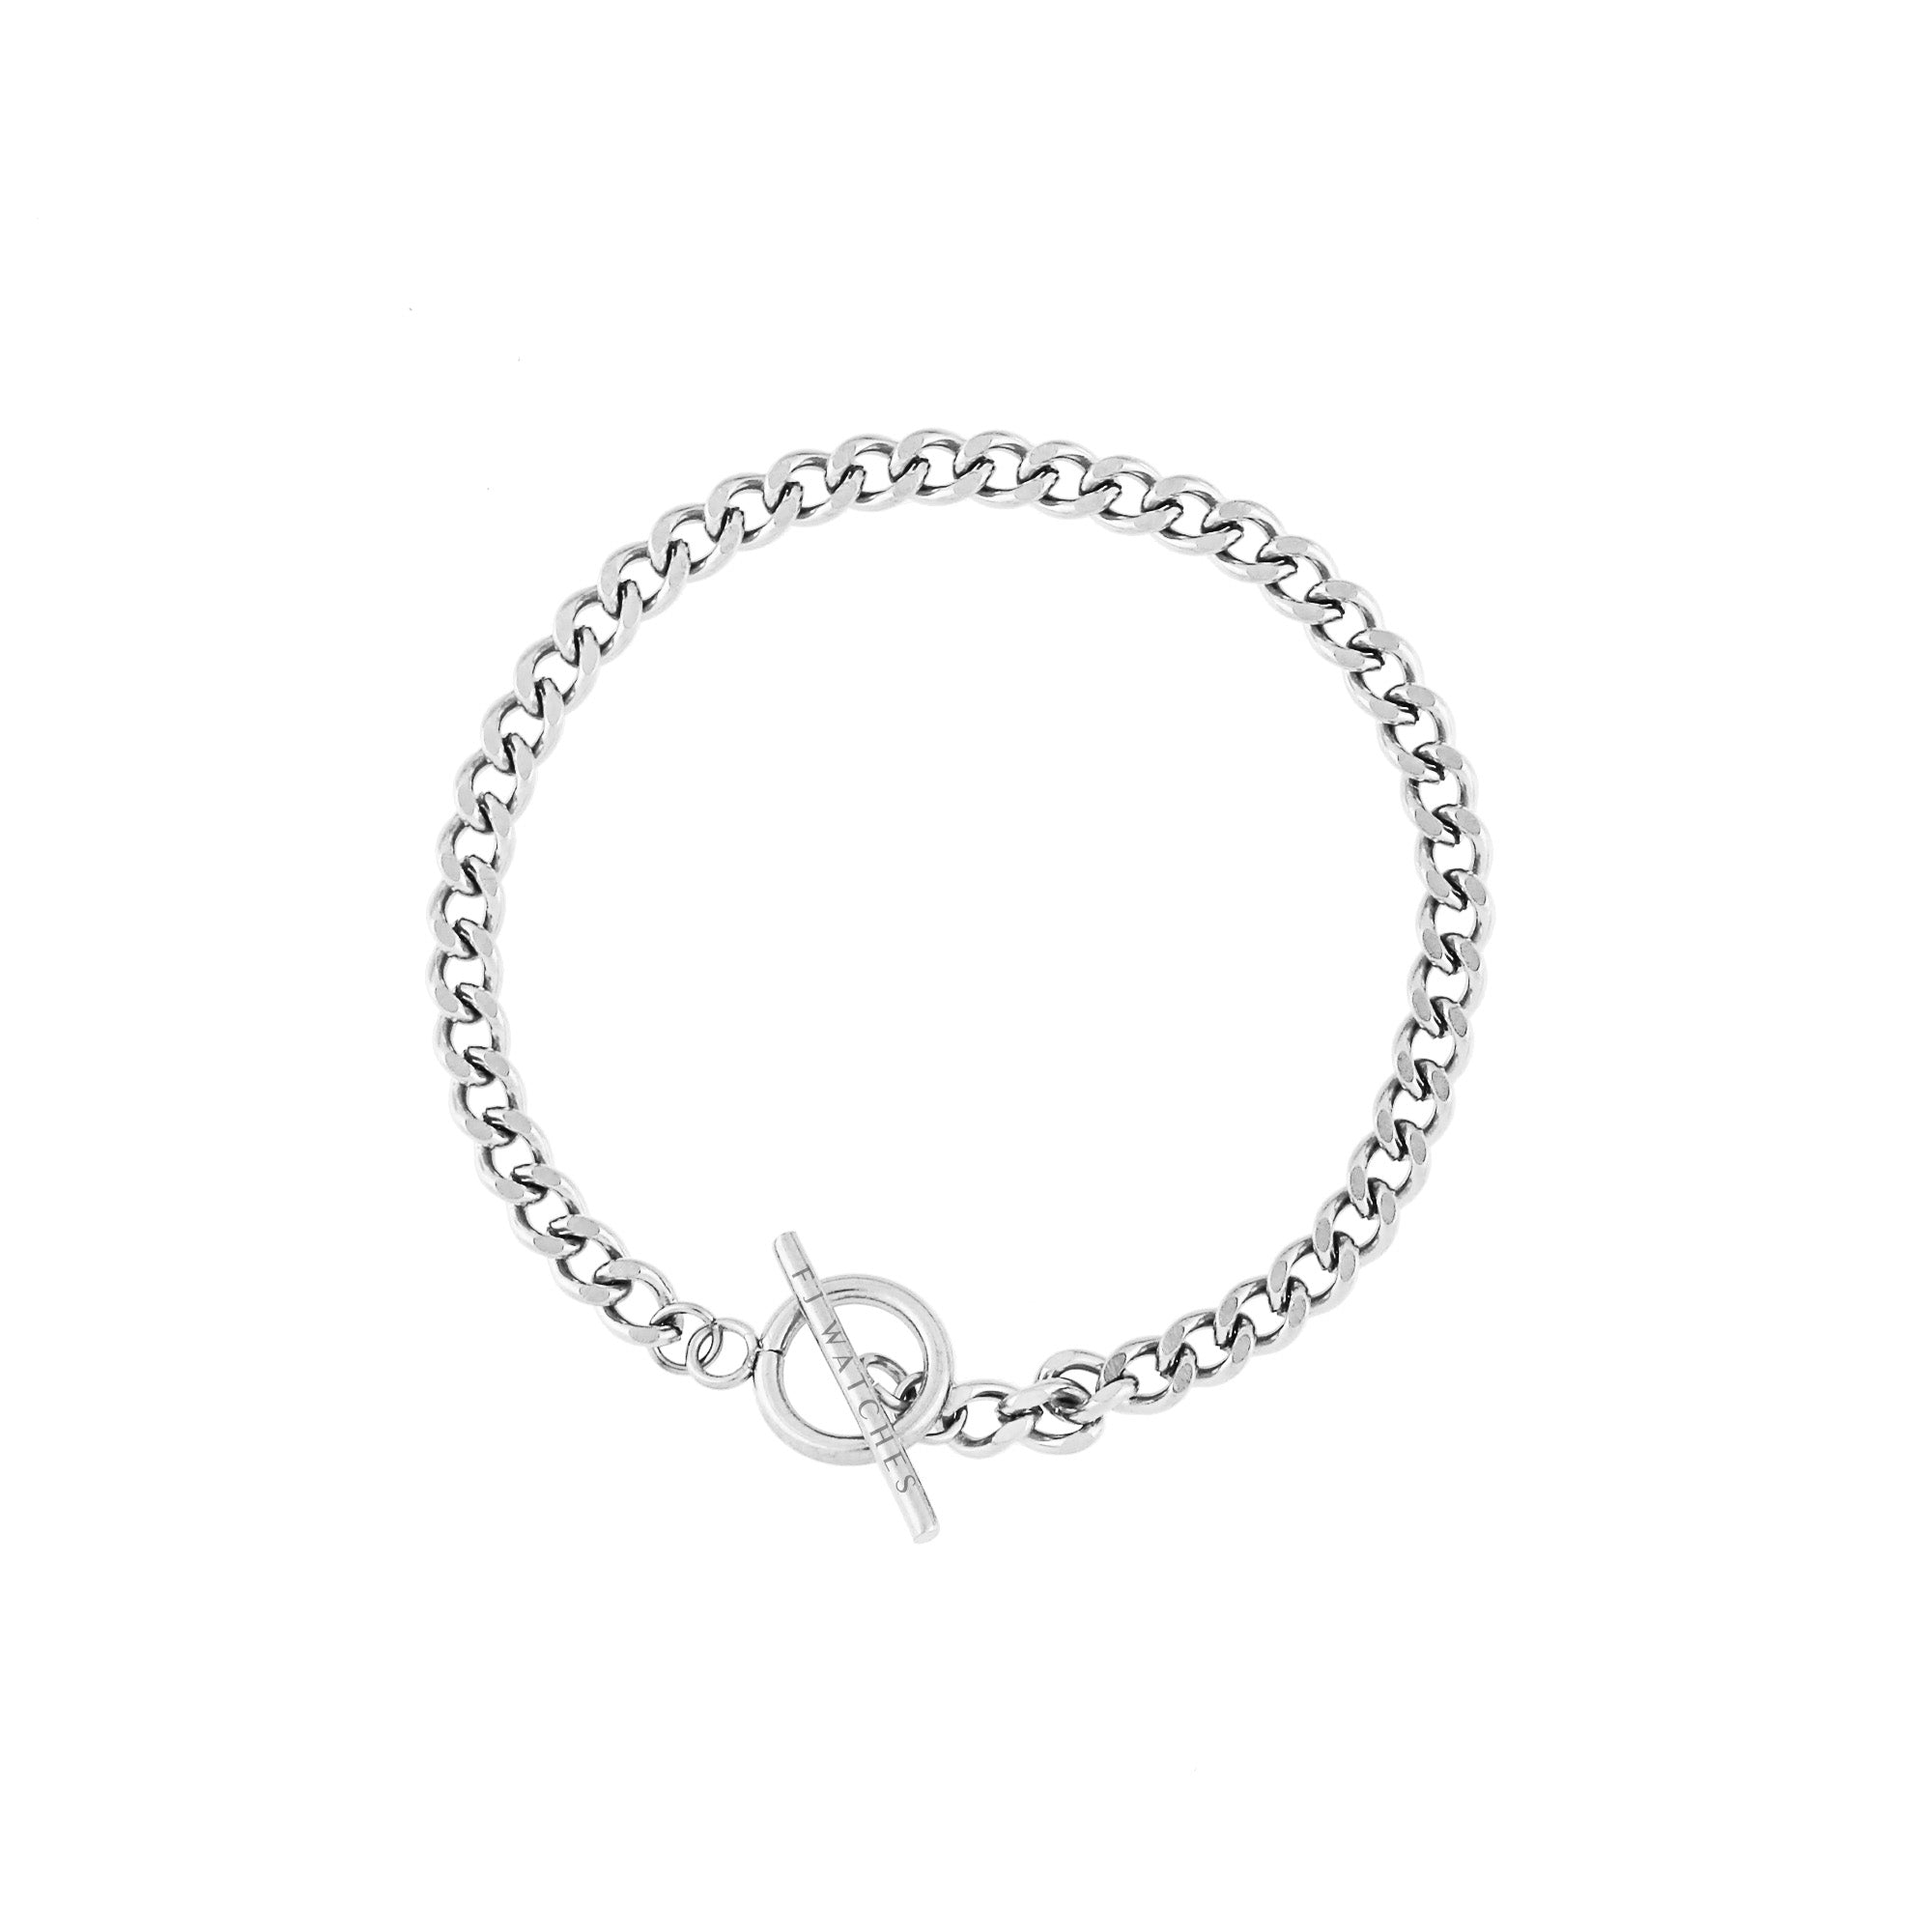 Jucar bracelet from Five Jwlry, designed in Montreal, Canada. Features a Cuban chain link in silver-colored, ultra-resistant 316L stainless steel with a distinctive circular toggle clasp closure.